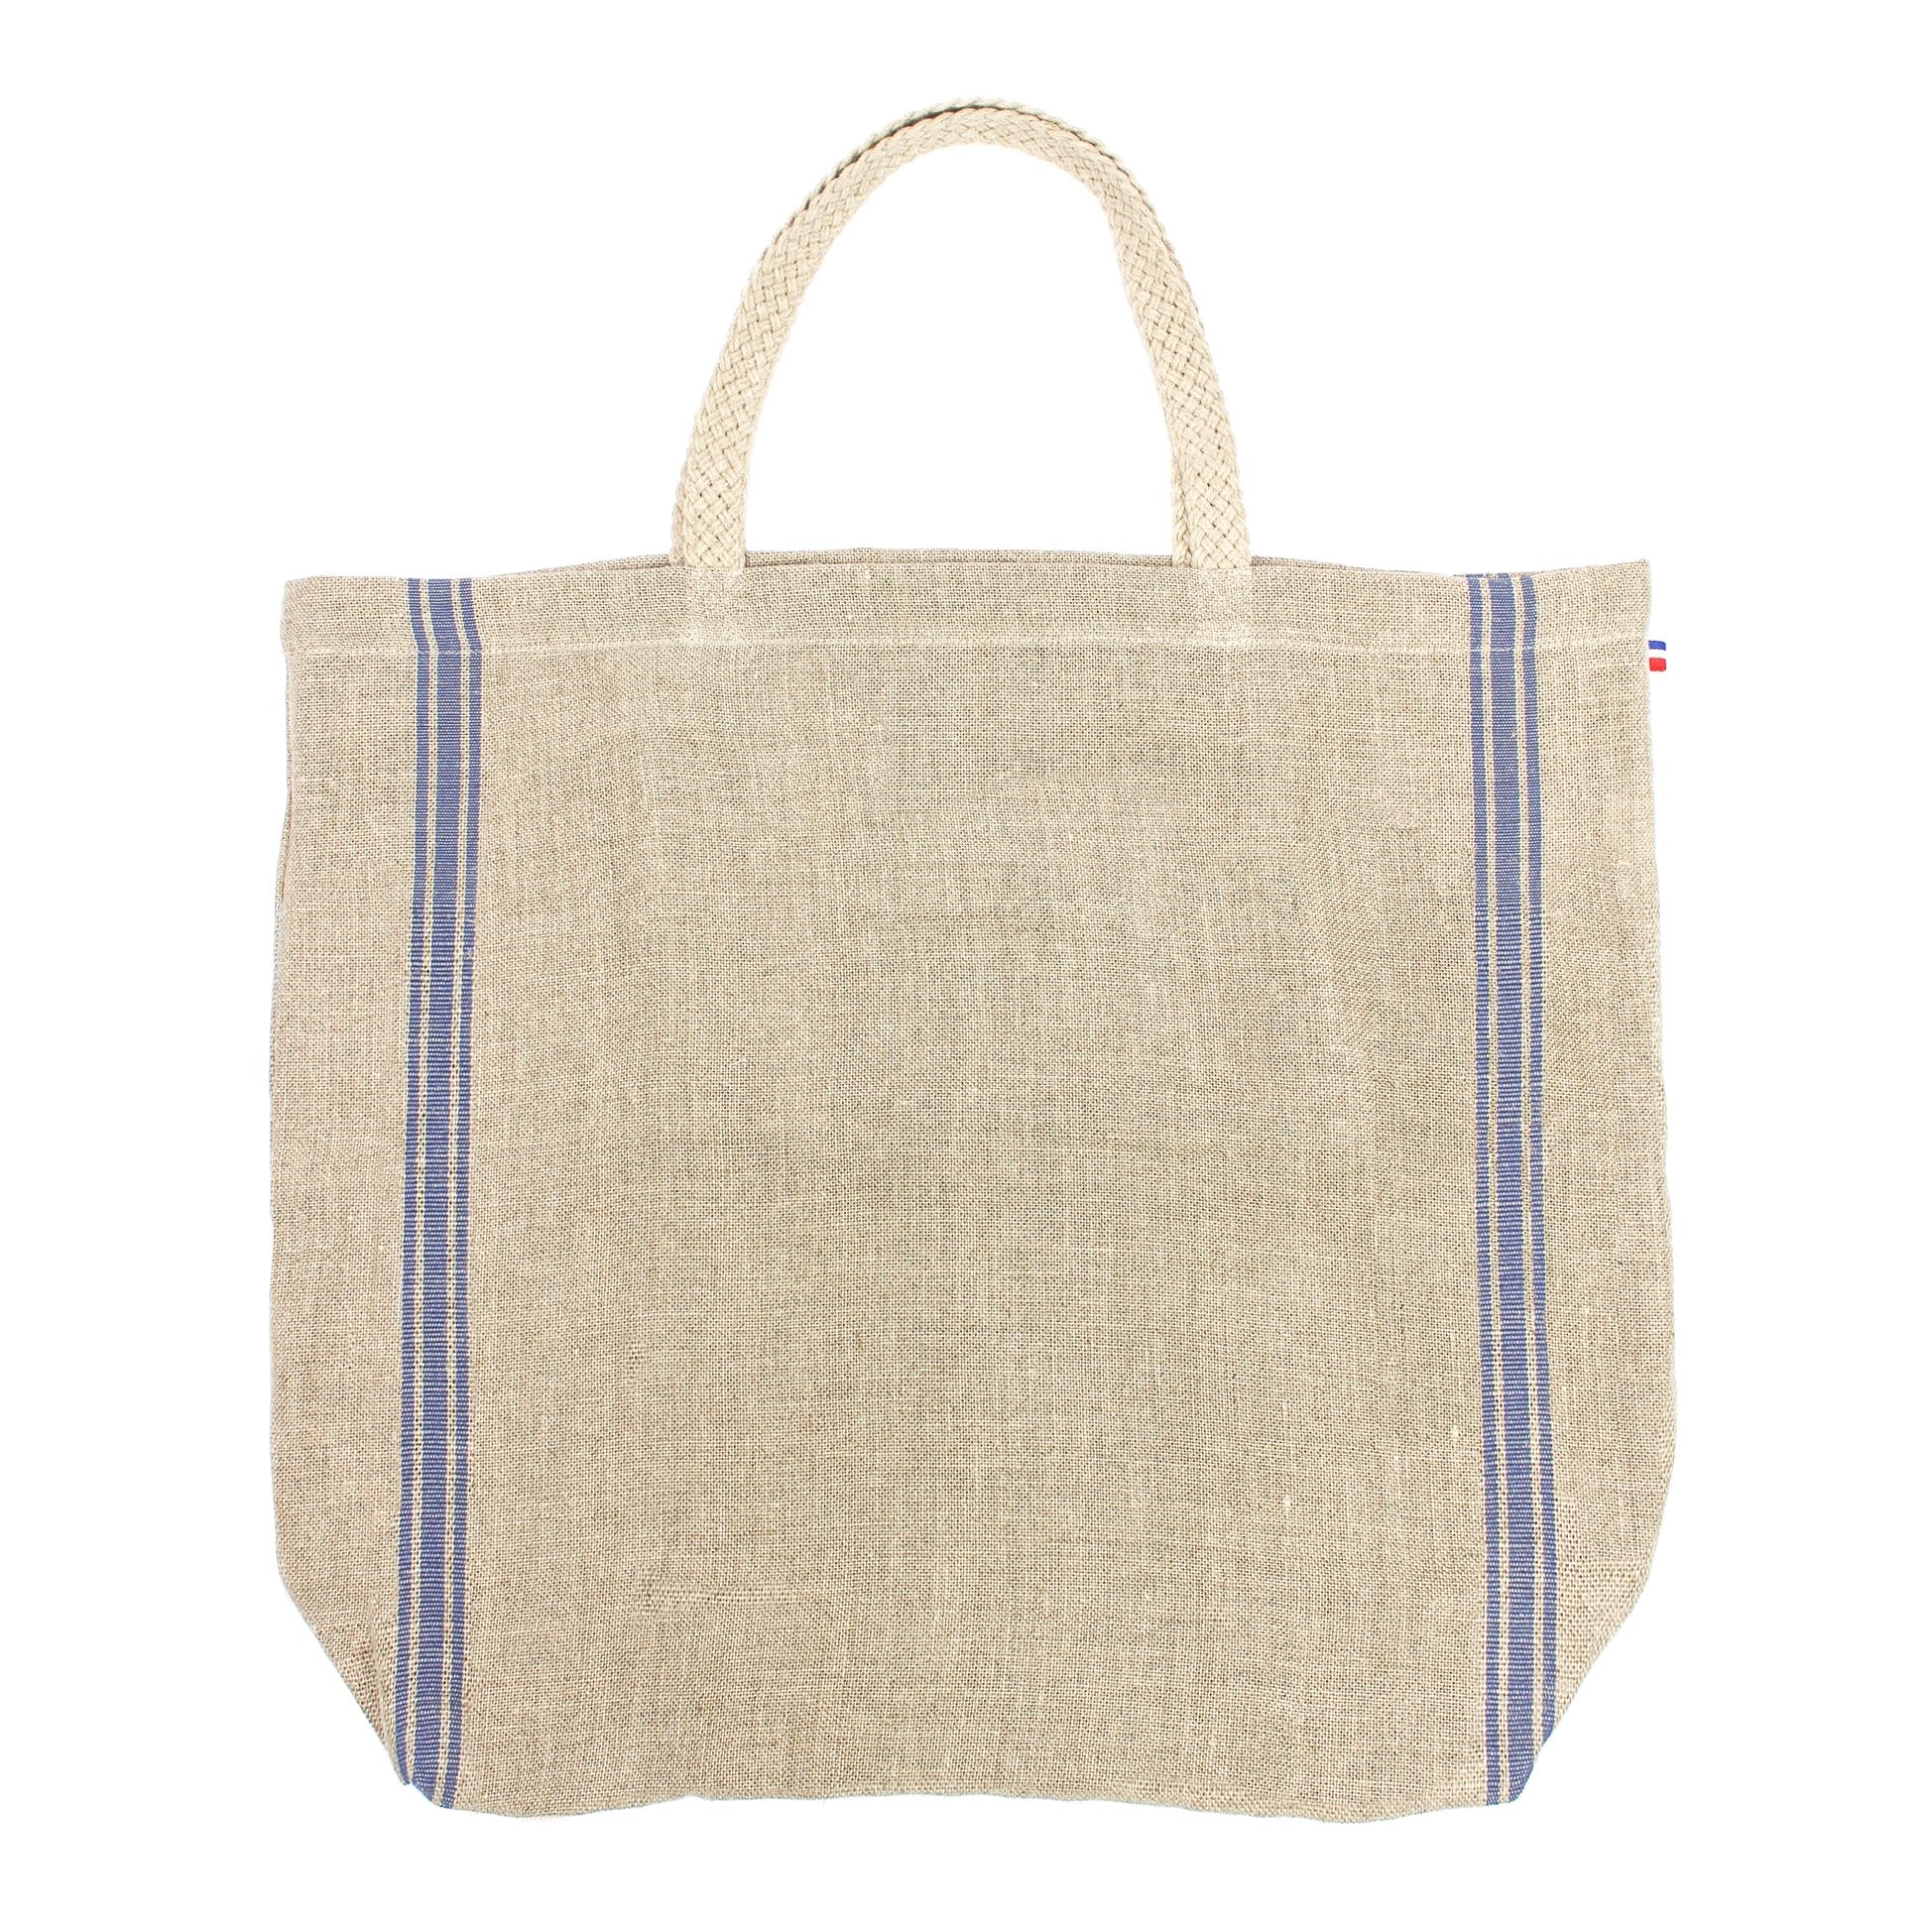 Monogramme Thieffry Linen Beach Tote with Braided Handle and Inner Zipper Pocket